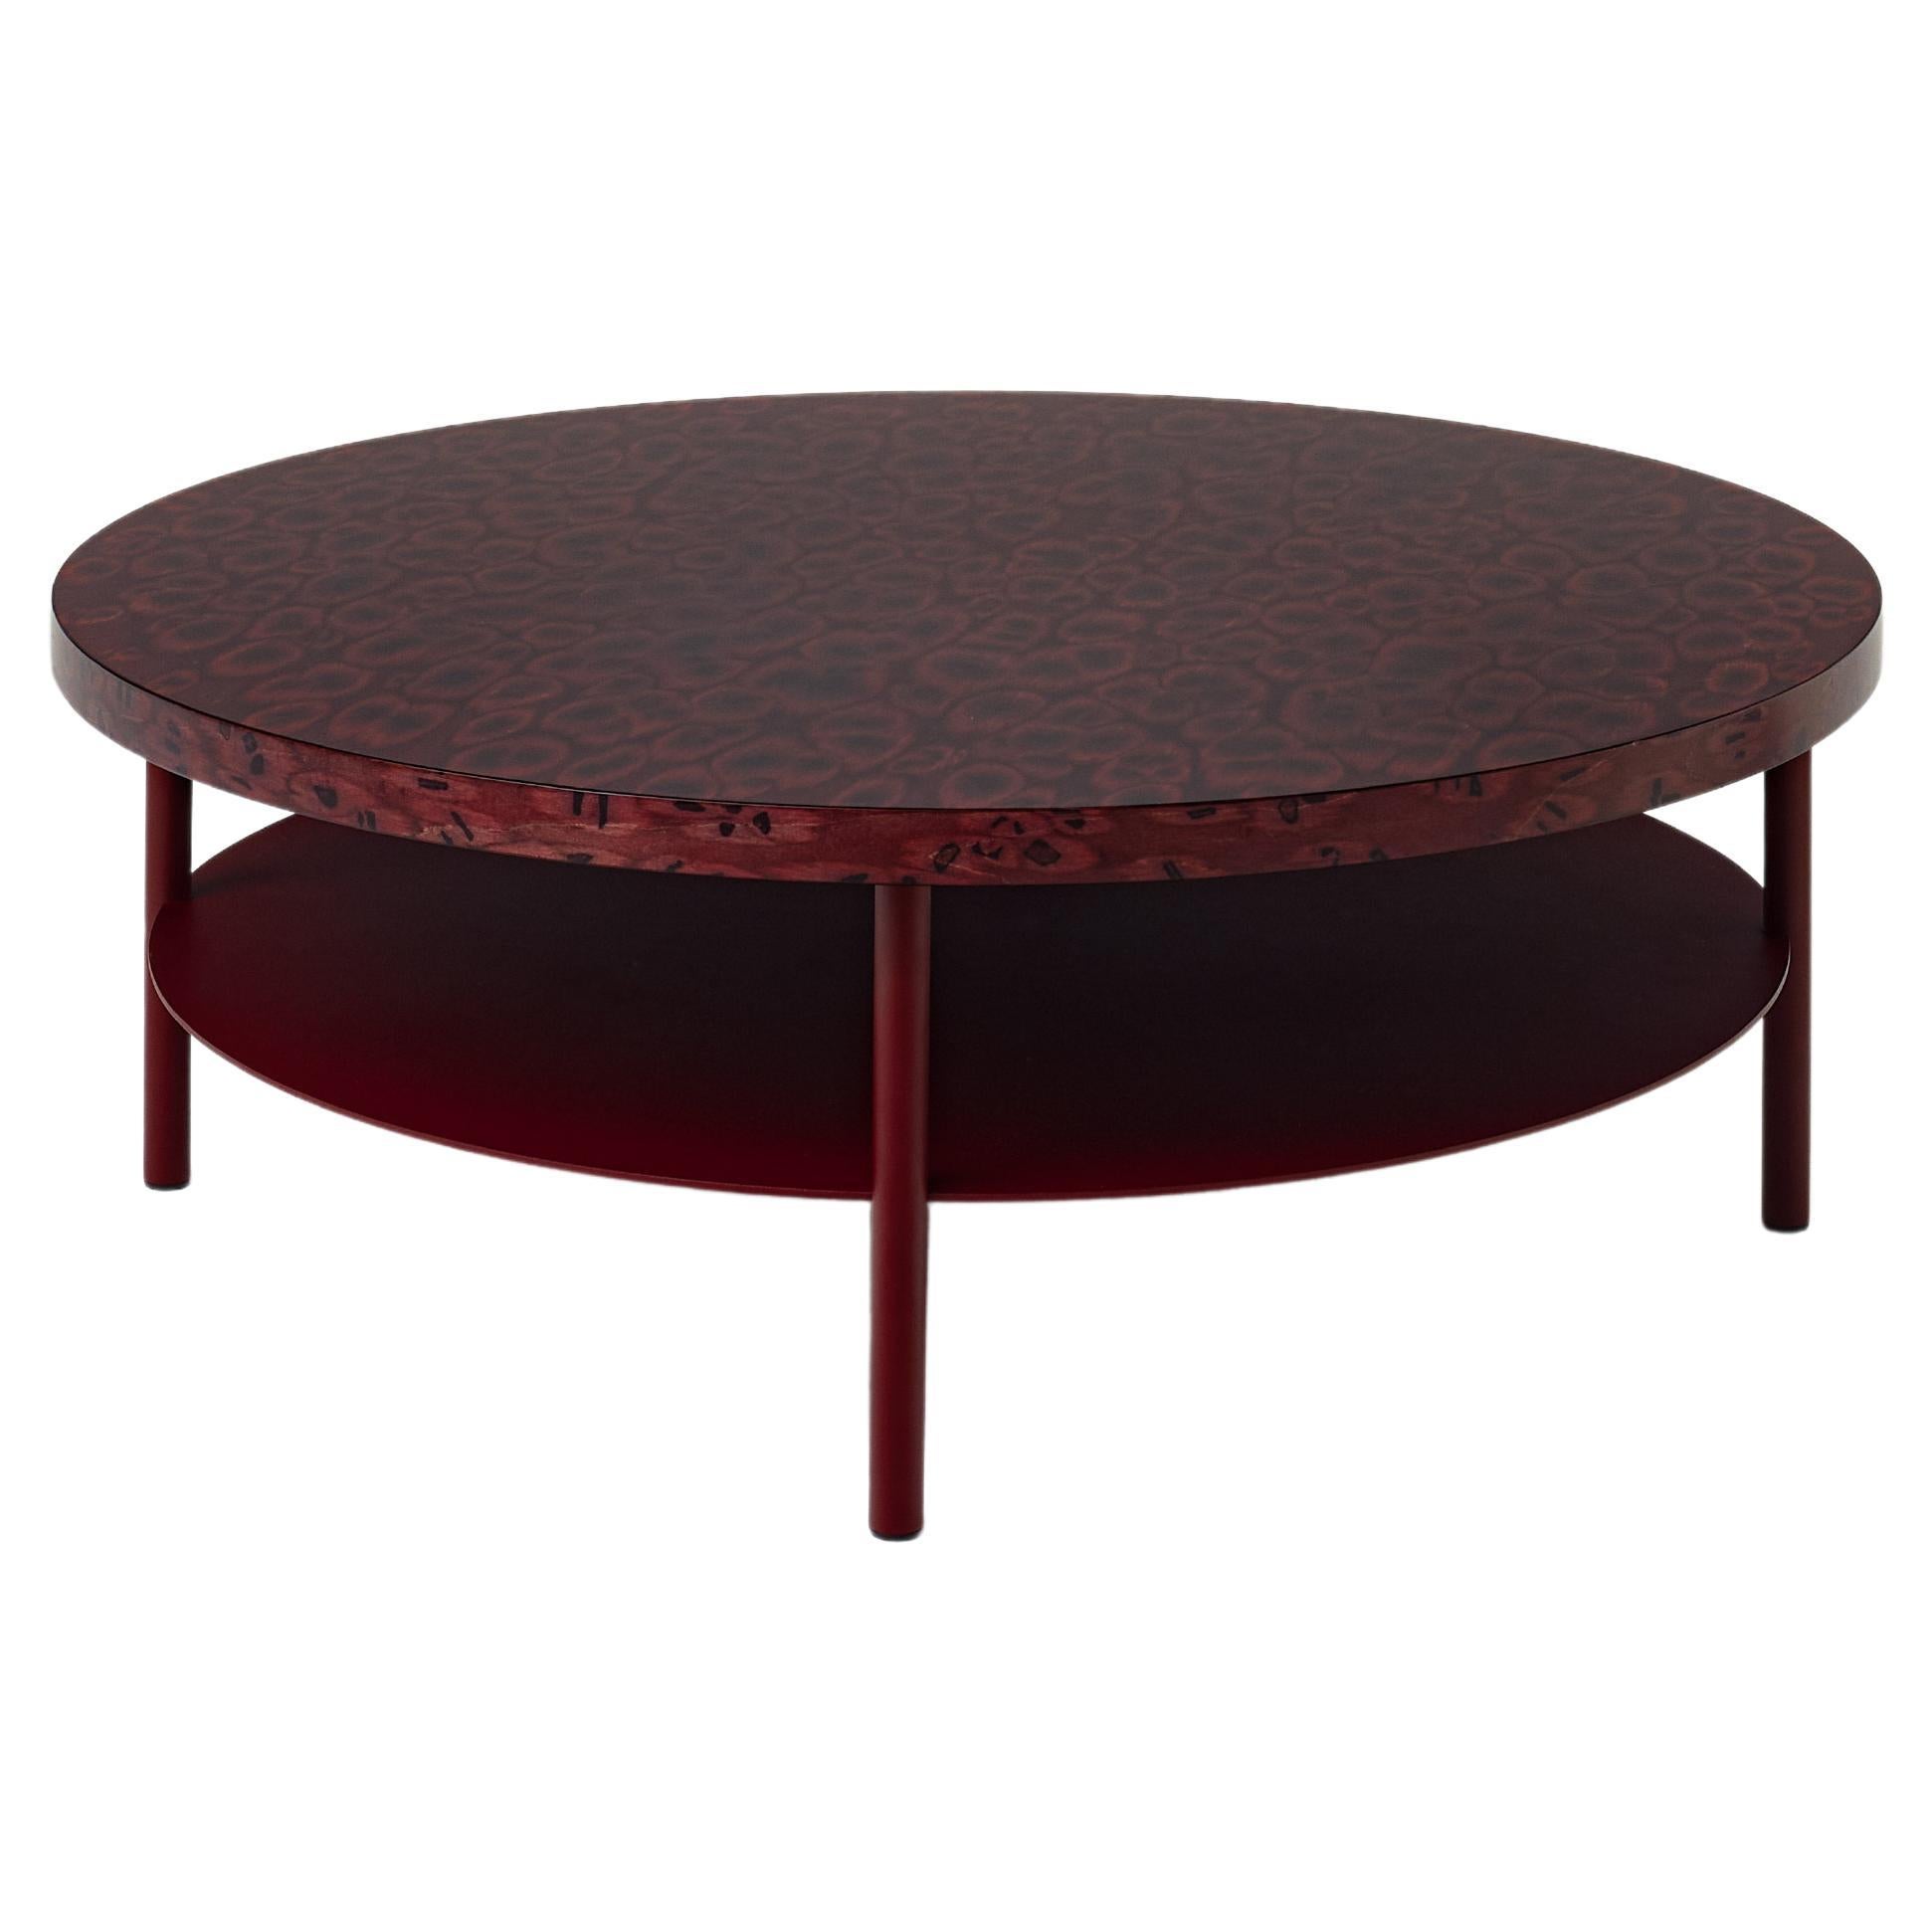 Osis Pila Low Table by Llot Llov For Sale